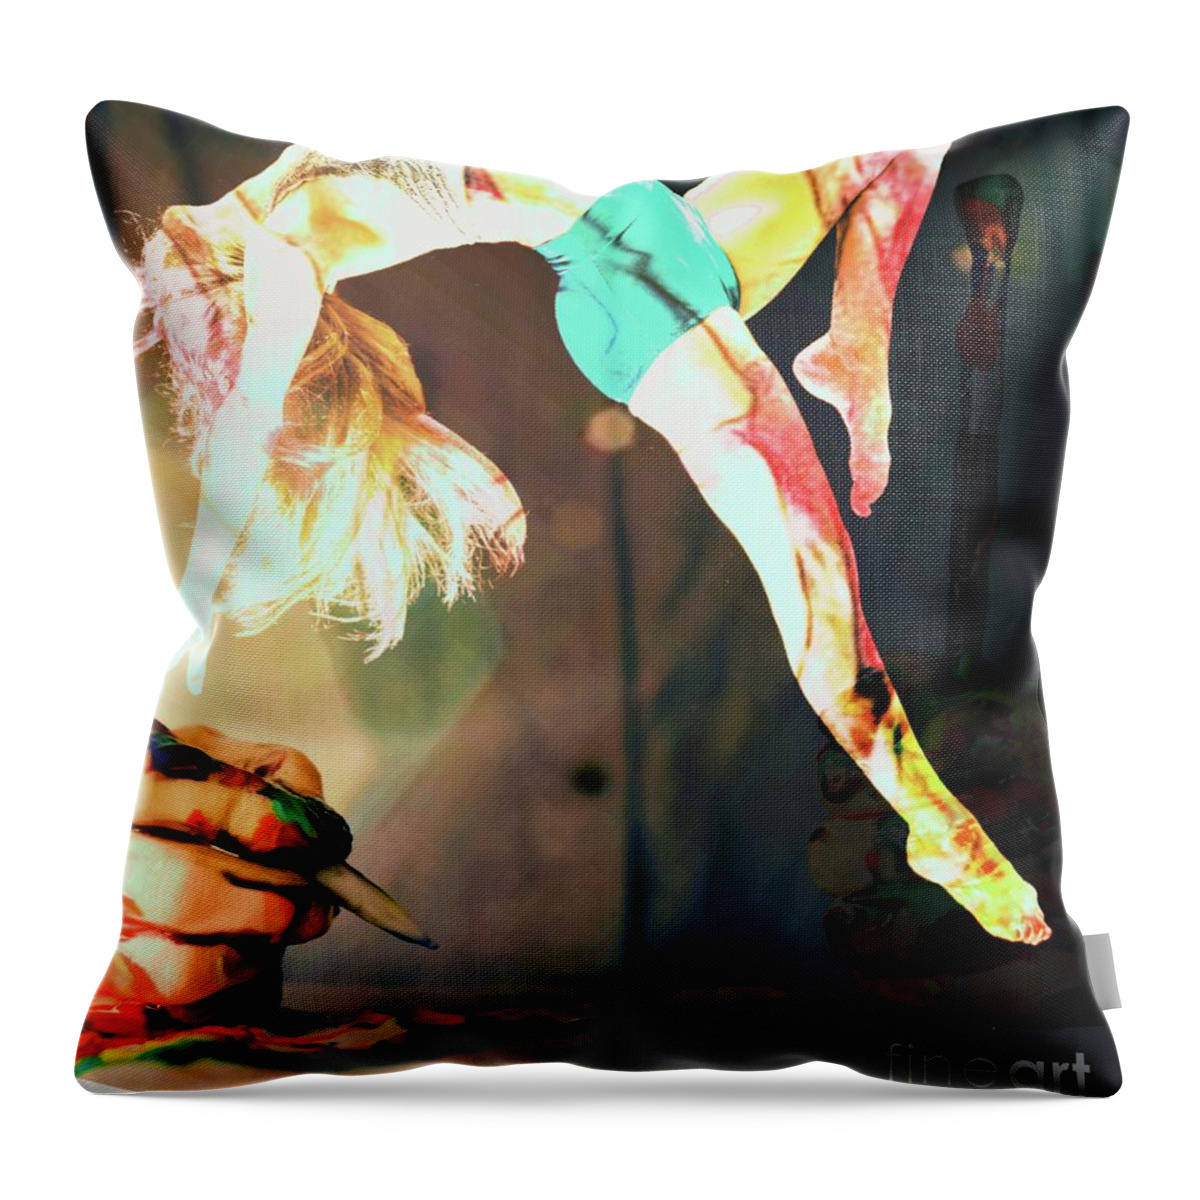  Throw Pillow featuring the digital art Paint The Movement by Yvonne Padmos